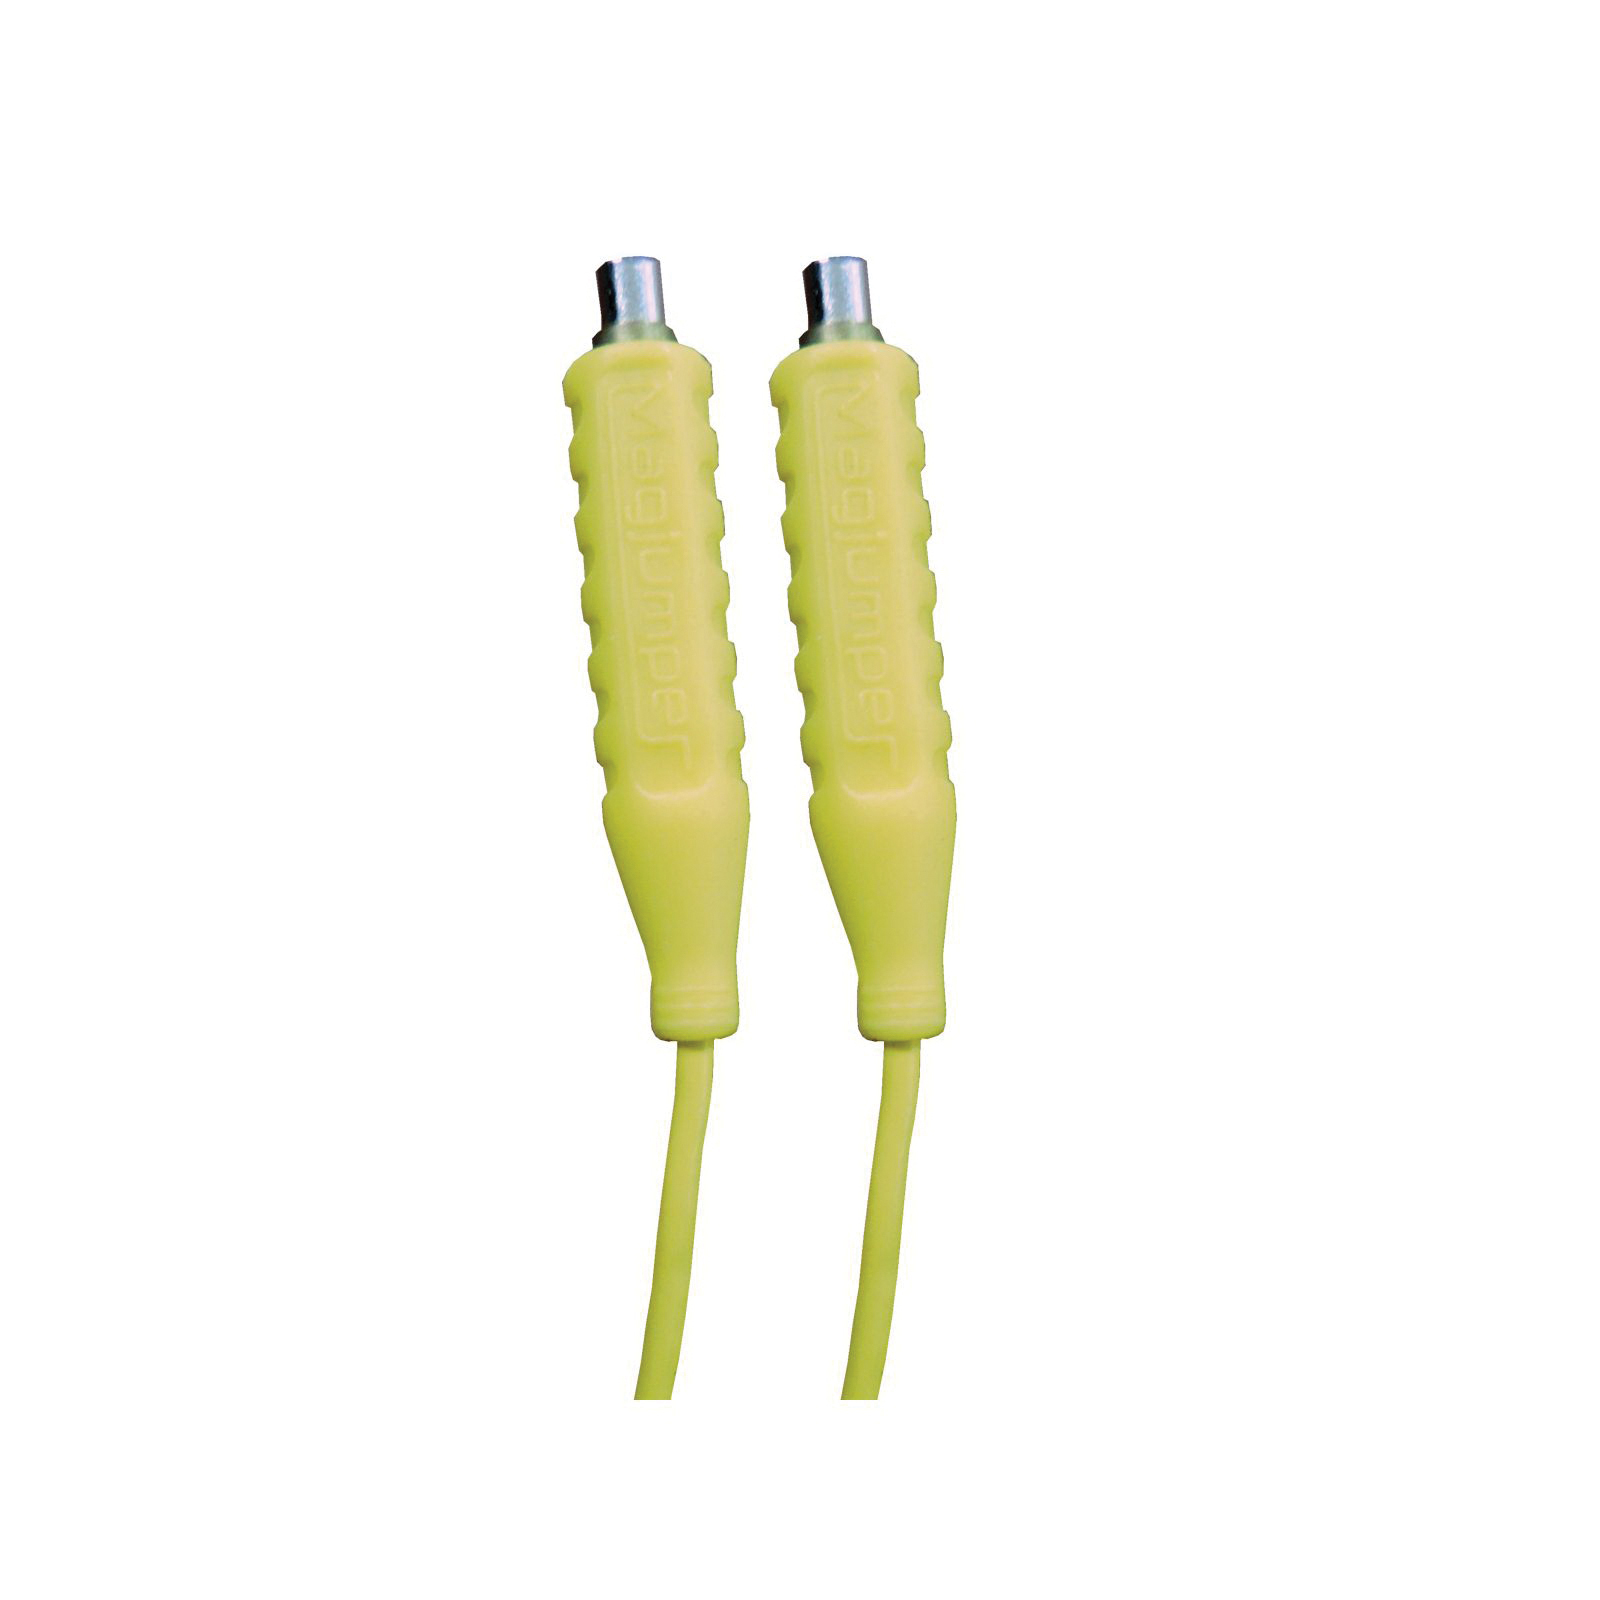 Supco® Magjumper MAG1YL Magnetic Test Lead, 5 A, 30 VAC/VDC, Yellow